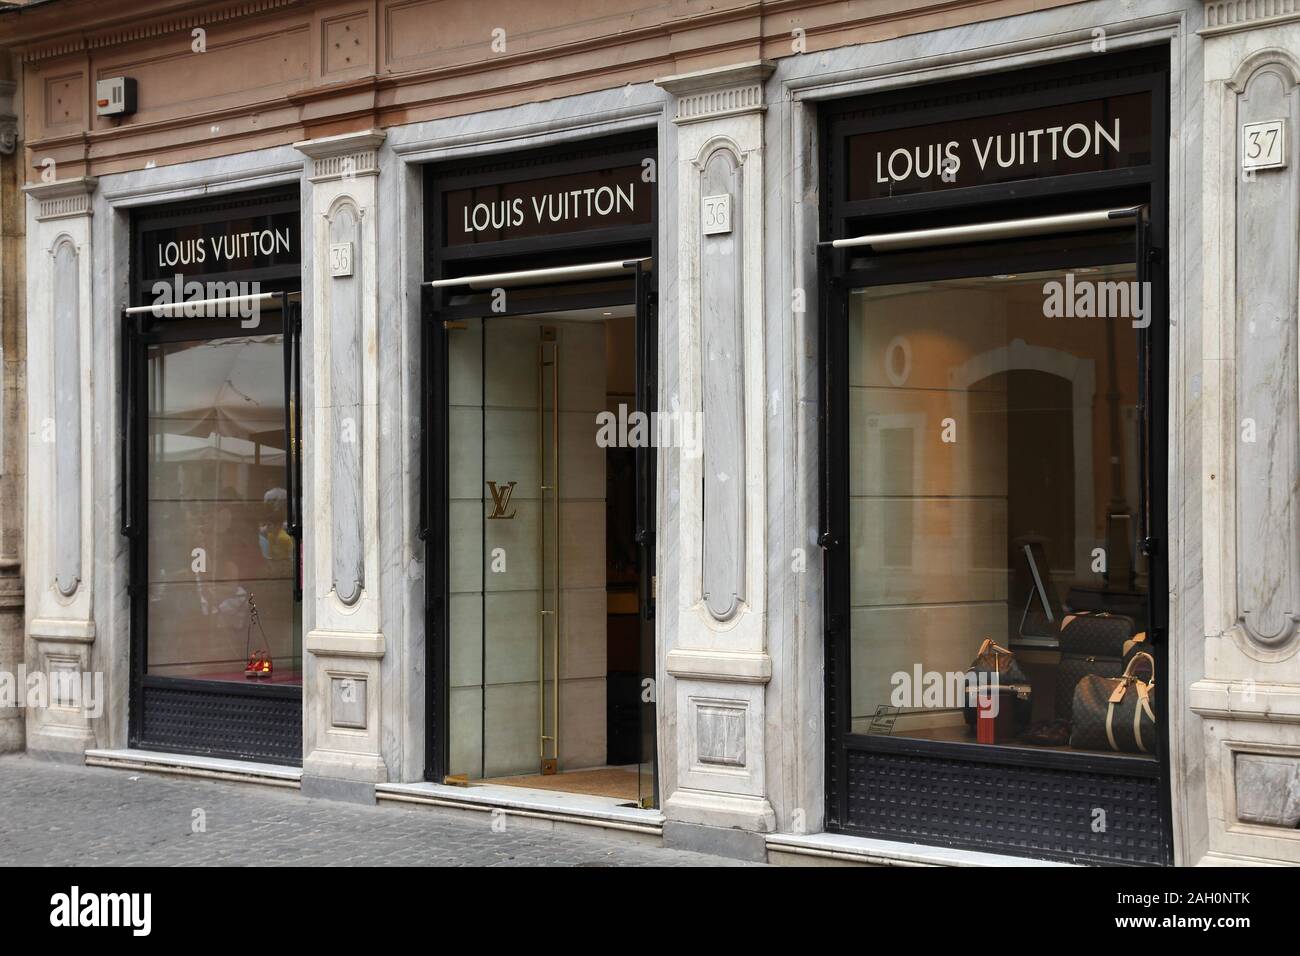 Louis Vuitton is the world's most searched for brand according to